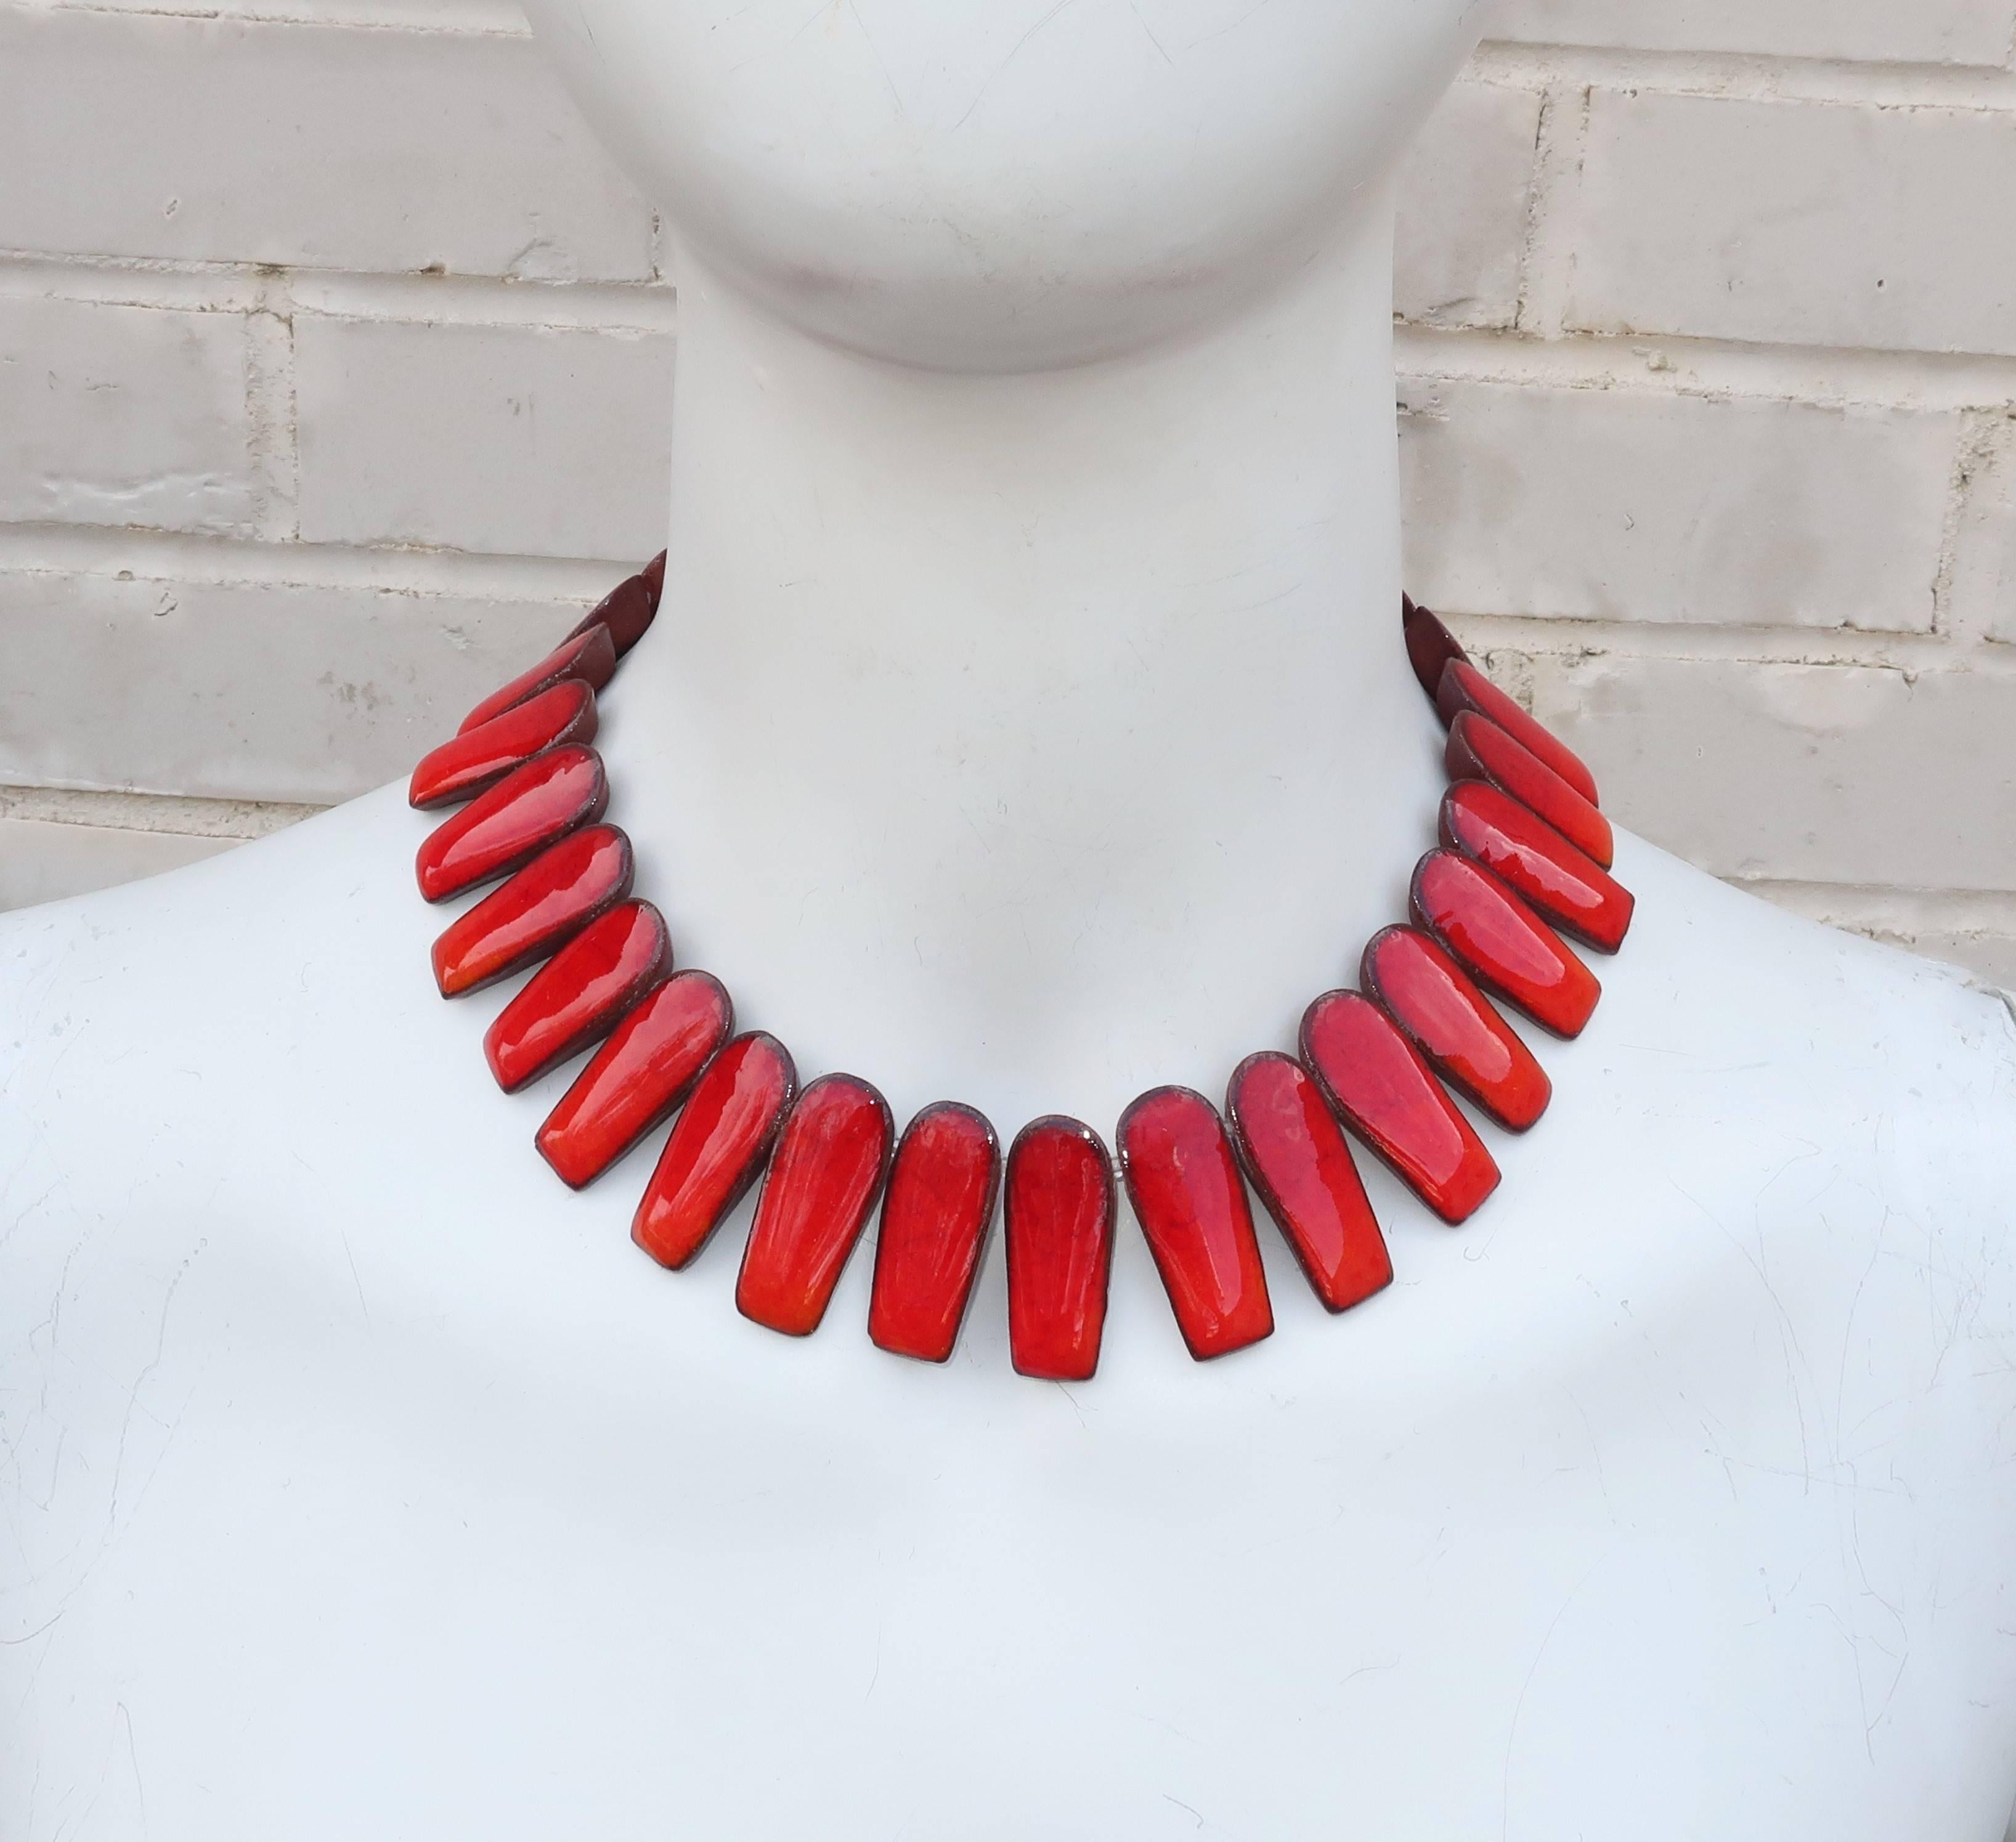 This stunning art pottery necklace by Brondsted of Denmark combines the vibrancy of artisan design and modernist costume jewelry.  Amazingly, each link of this exotic collar necklace is a piece of pottery bearing a fiery glaze with decoration that